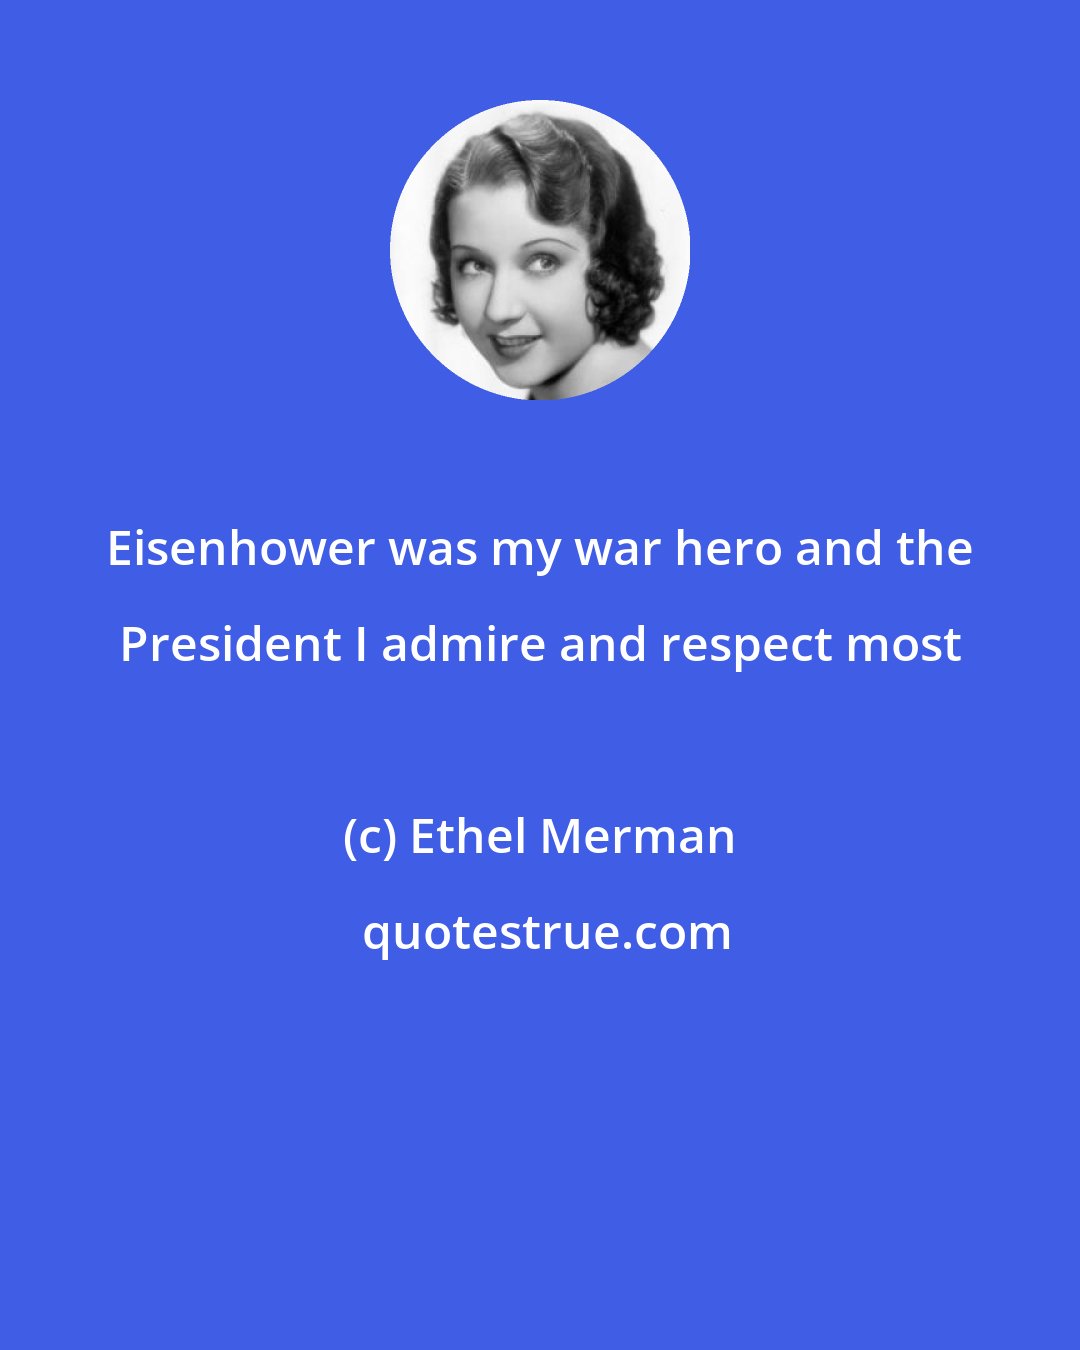 Ethel Merman: Eisenhower was my war hero and the President I admire and respect most